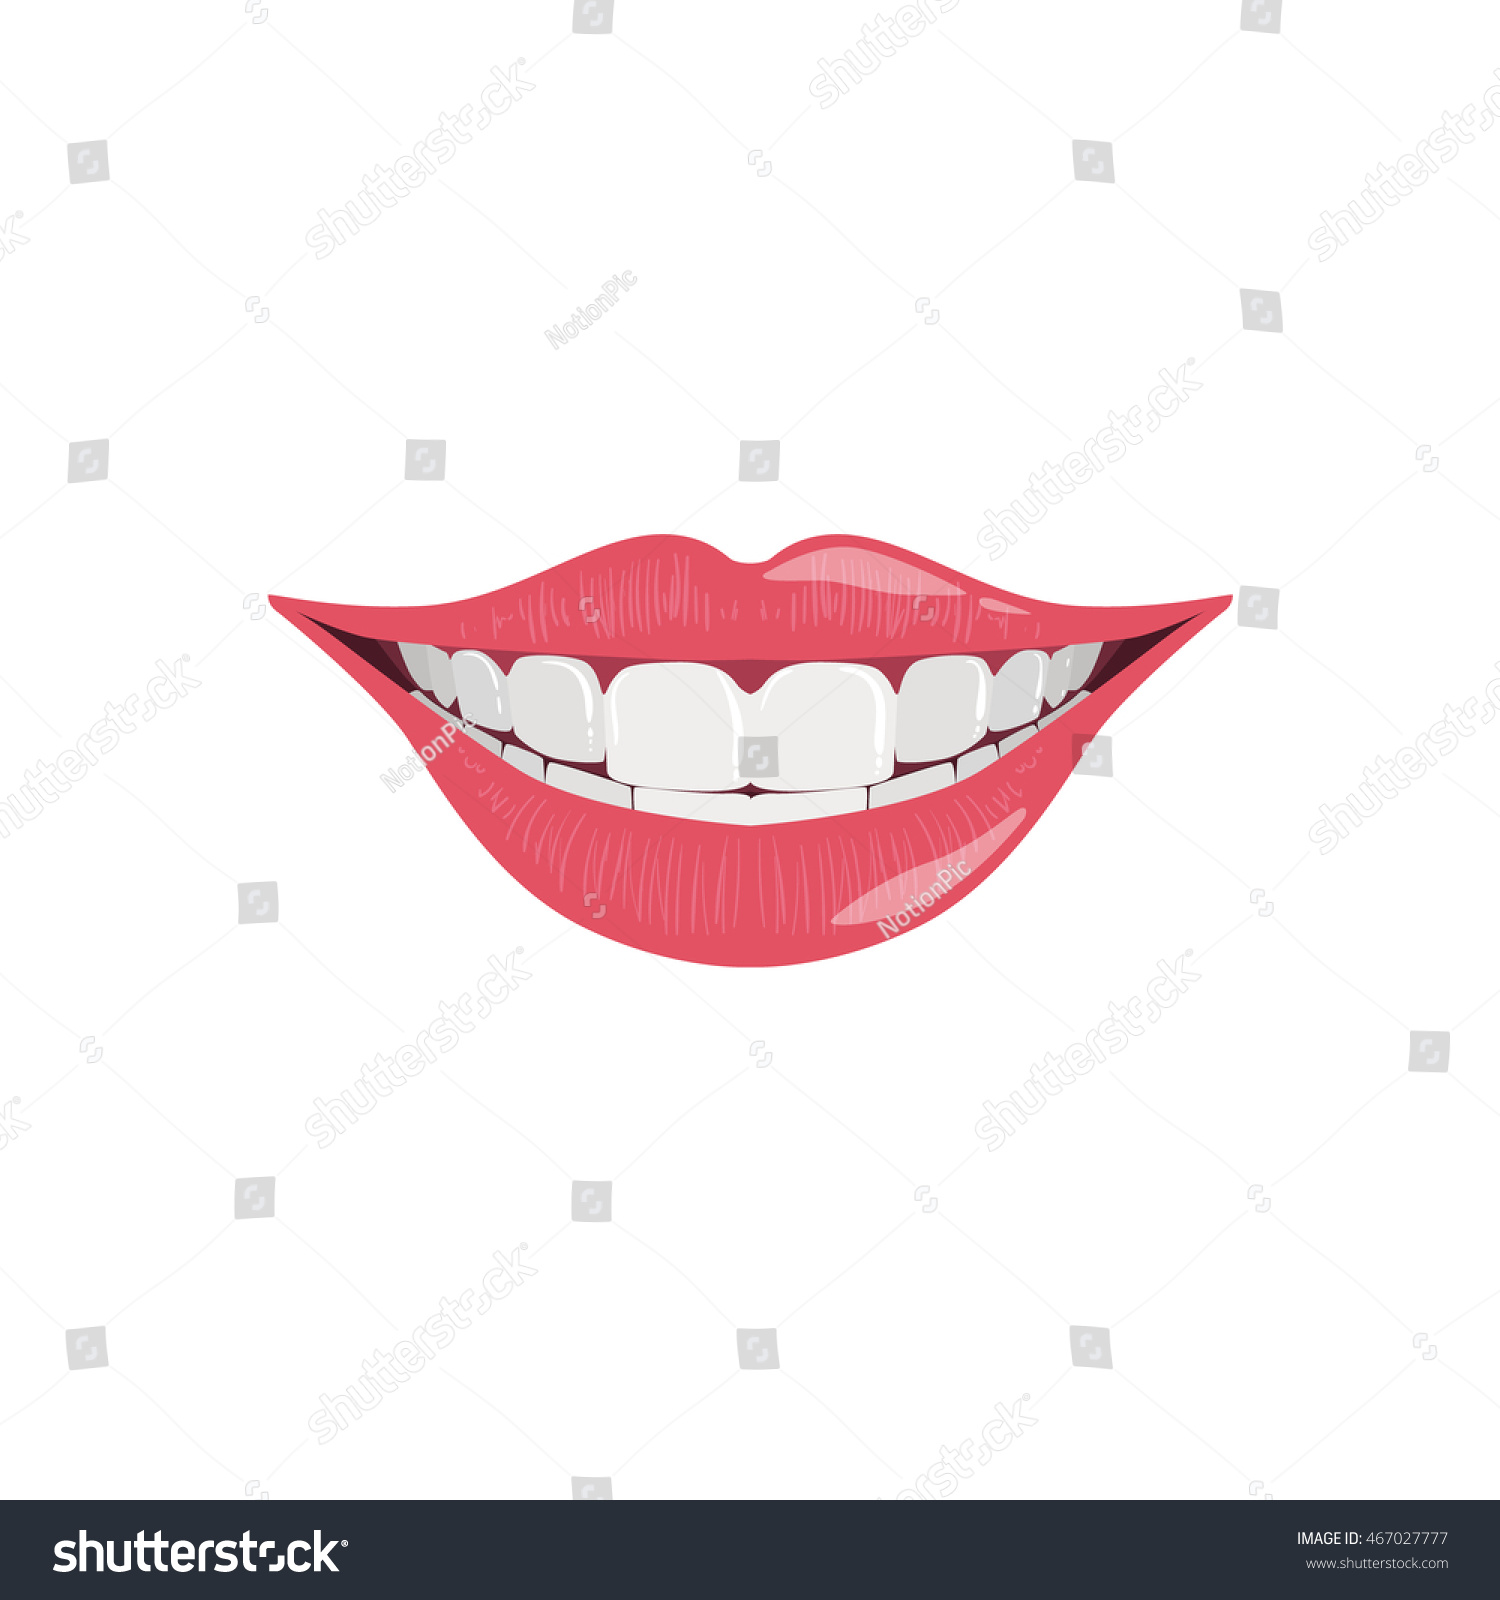 SVG of Isolated Female Smile With Pink Lips And White Teeth svg